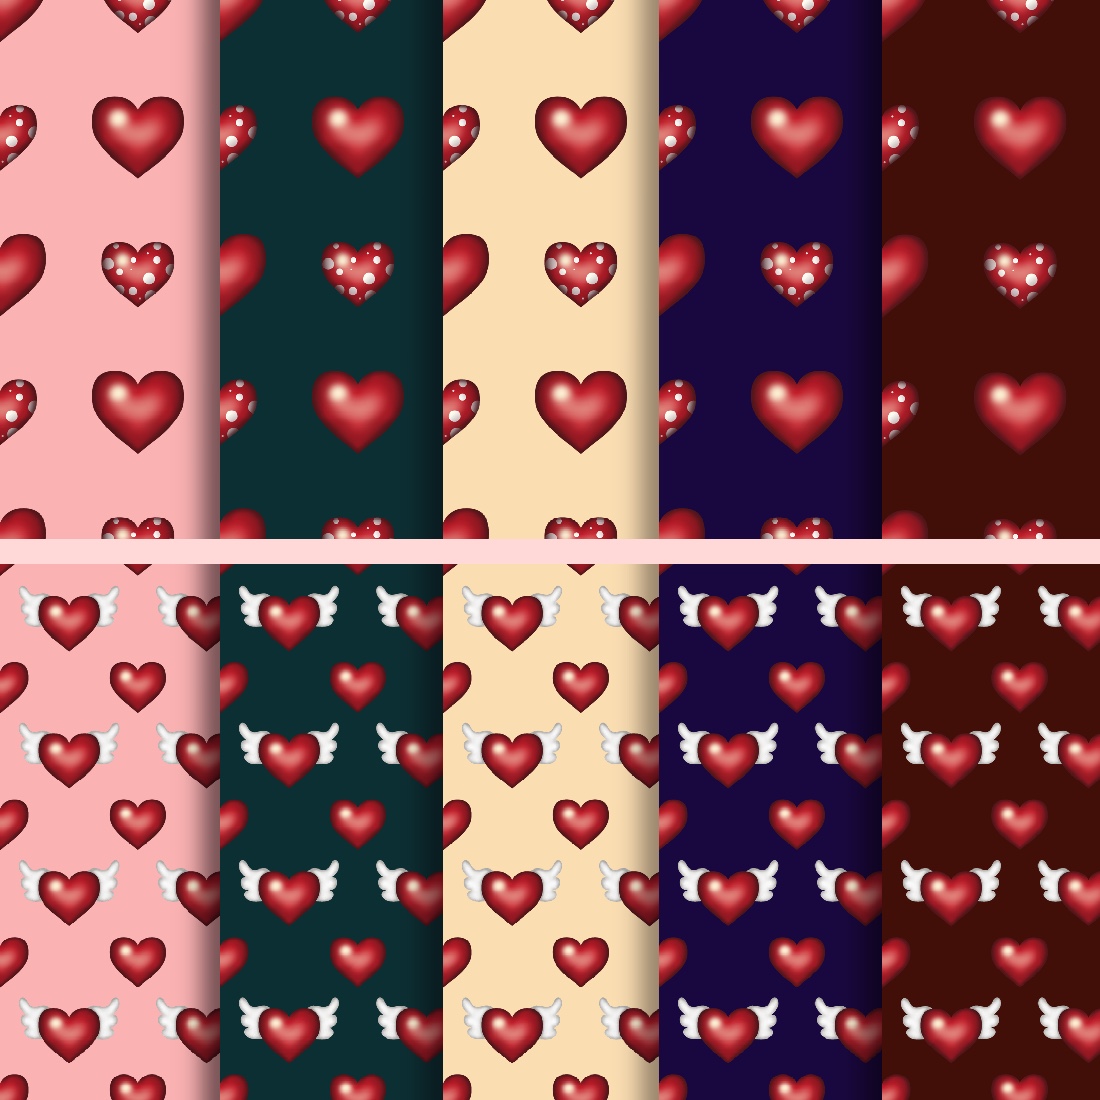 Lovely Colorful Seamless Patterns with Hearts: Valentine's Day.